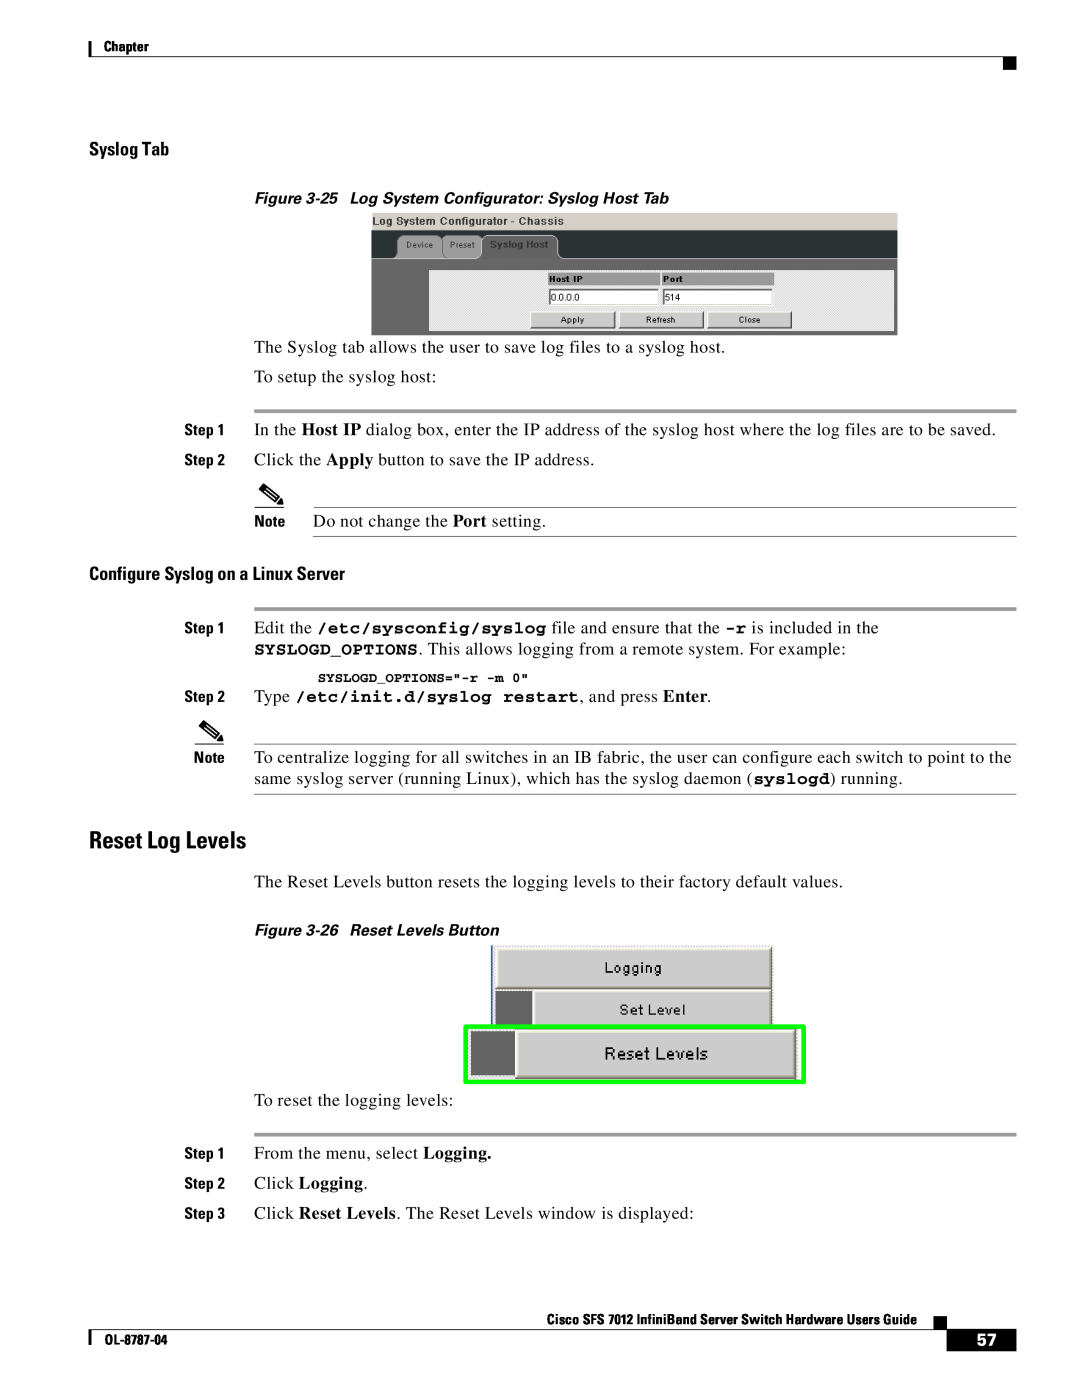 Cisco Systems SFS 7012 manual Reset Log Levels, Syslog Tab, Configure Syslog on a Linux Server 